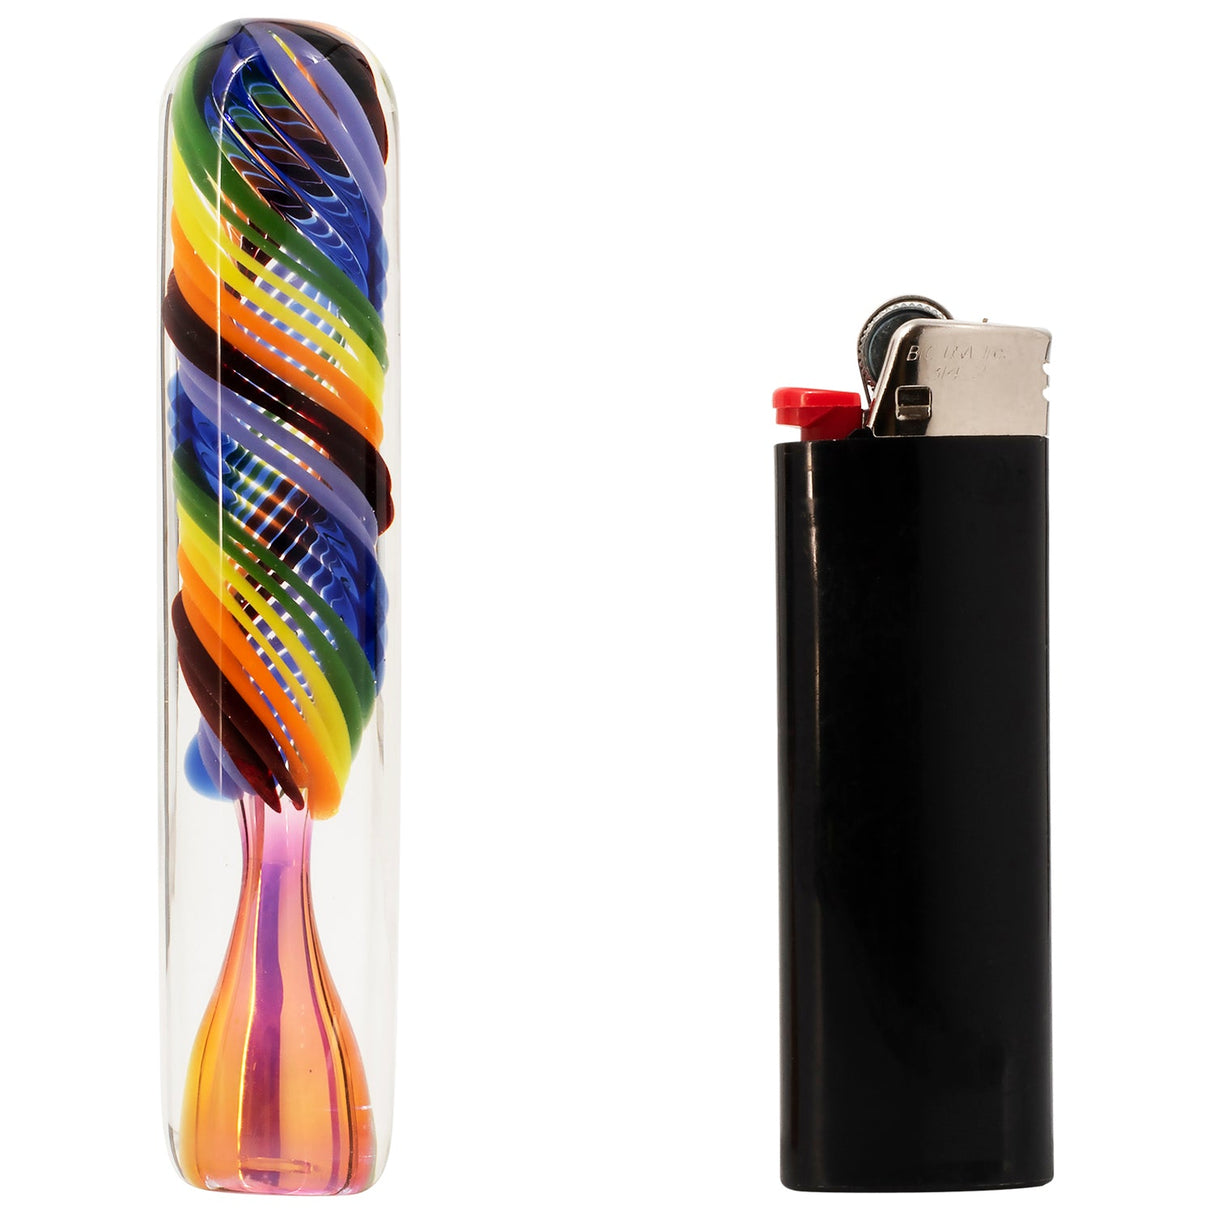 LA Pipes "Twisted Rainbow" Fumed Glass Chillum side view next to lighter for scale